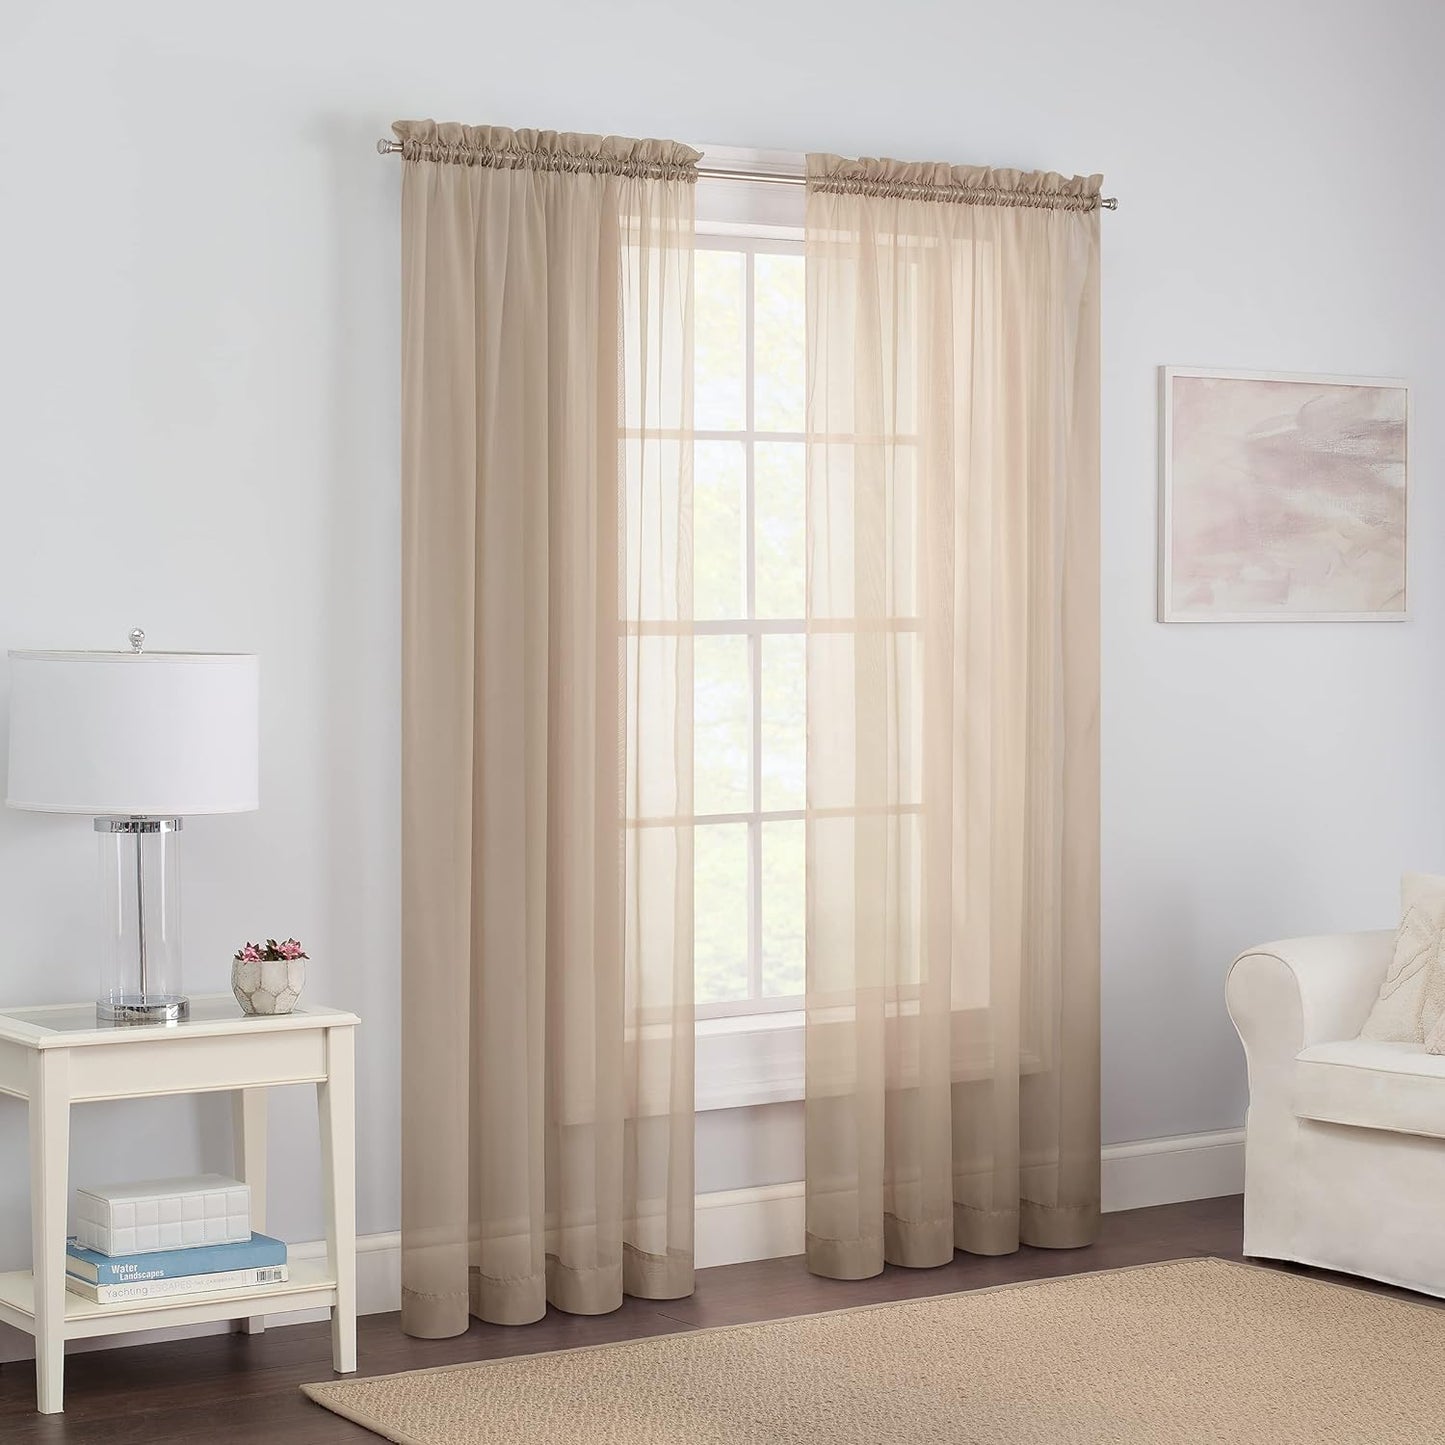 Pairs to Go Victoria Voile Modern Sheer Rod Pocket Window Curtains for Living Room (2 Panels), 59 in X 95 In, White  Ellery Homestyles Taupe Curtains 59 In X 84 In